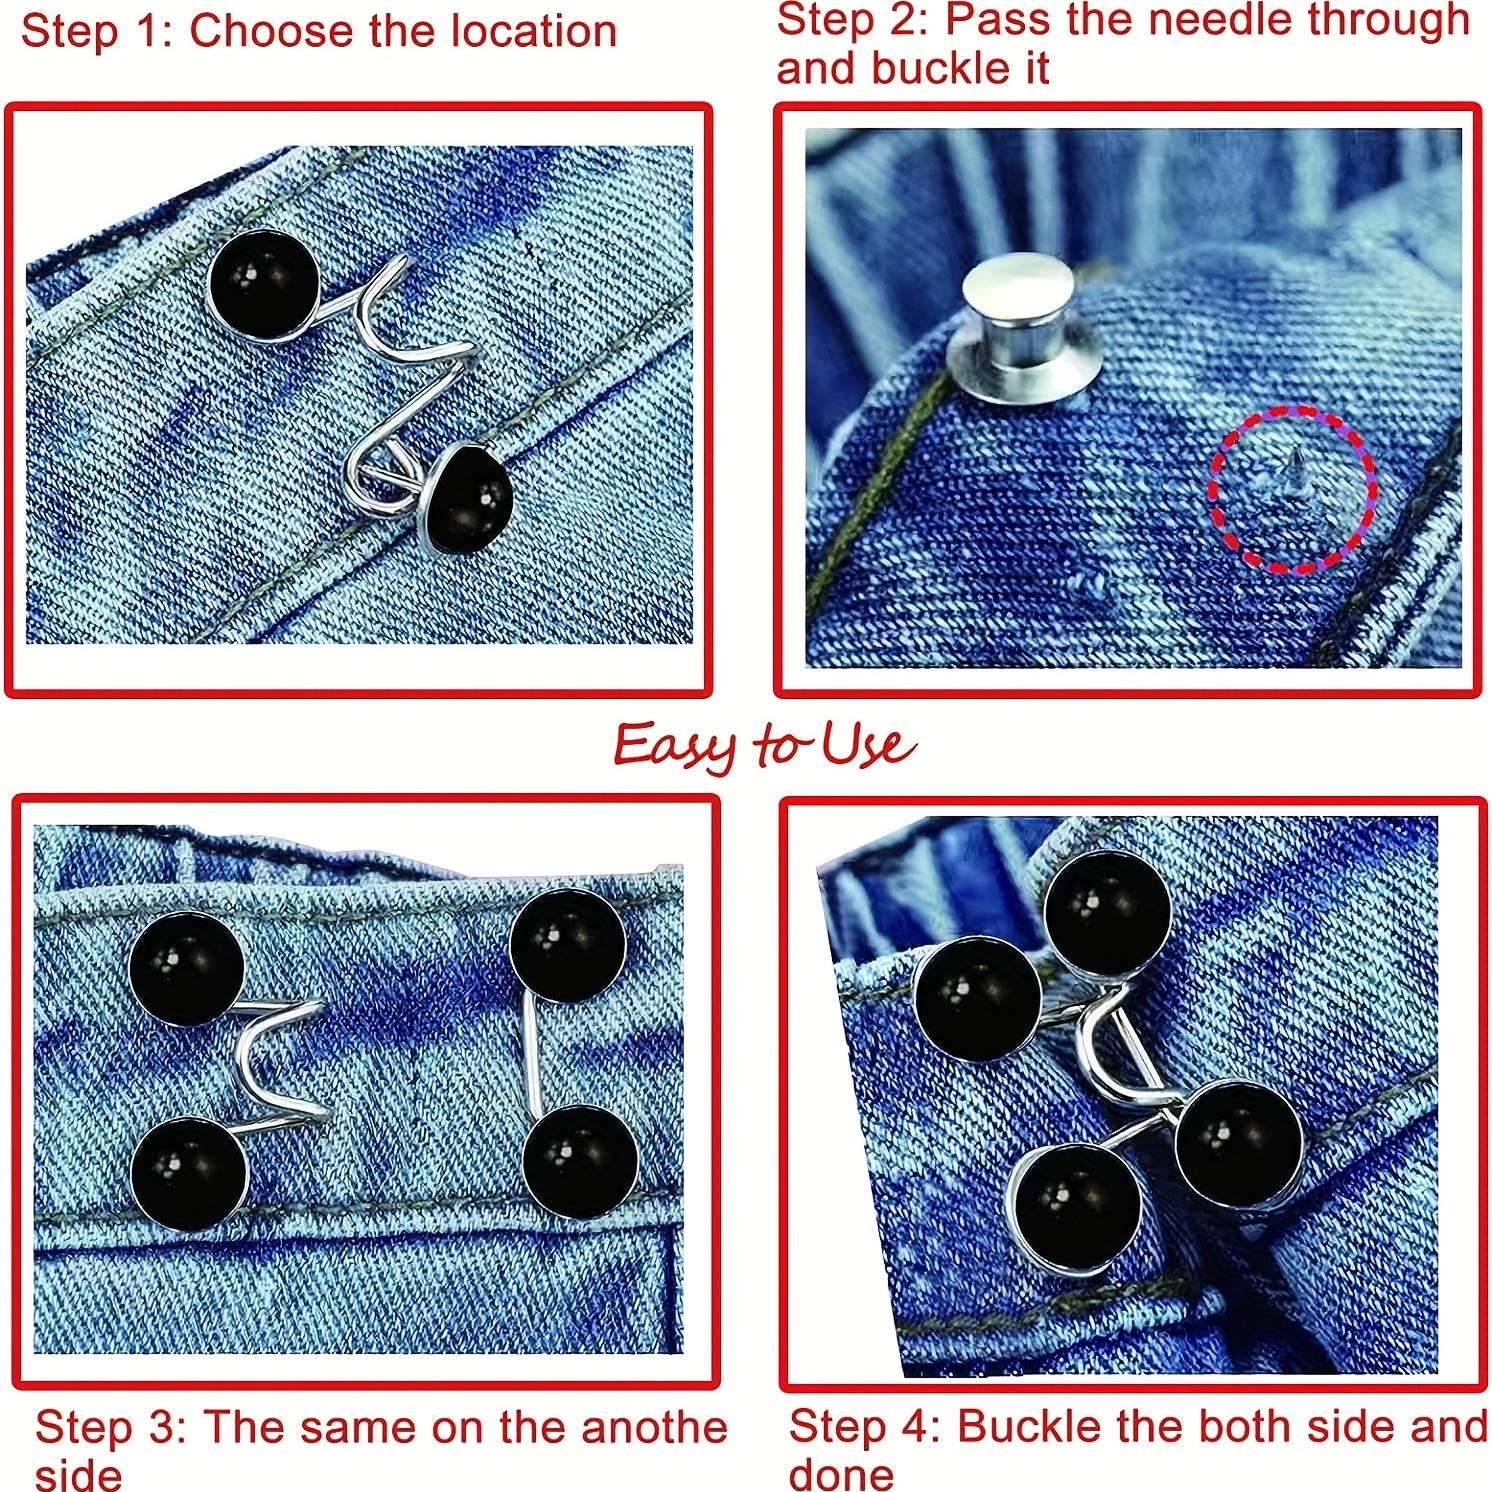 2pcs/set Jean Waist Tightener Adjustable Pant Button Pins Button For Jeans  Too Big Waistband Tightener Pants Clips For Waist - No Sewing Required,  White